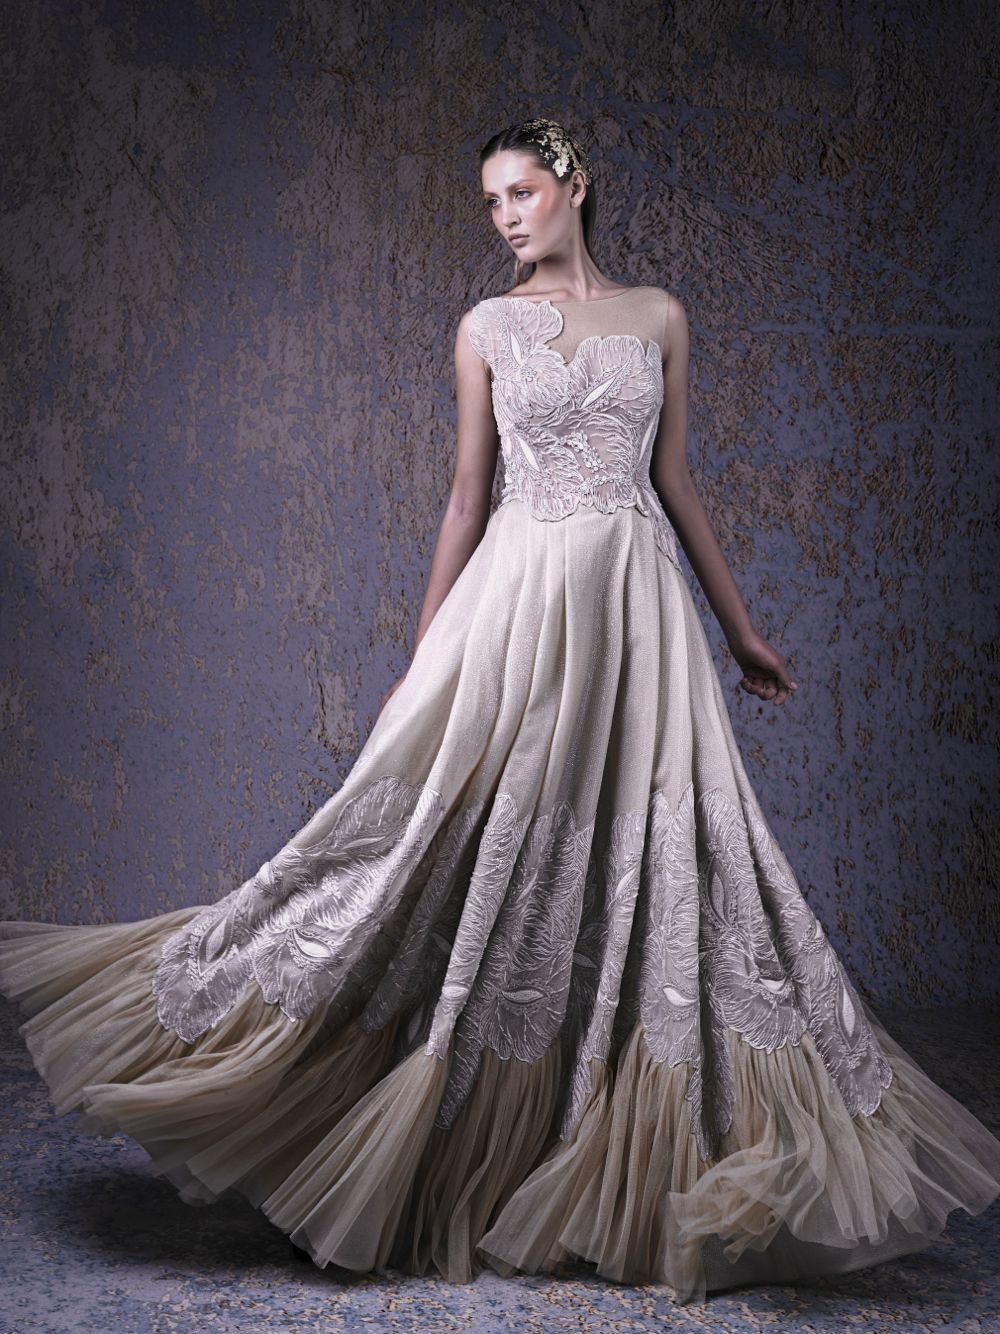 EMBELLISHED COUTURE GOWN